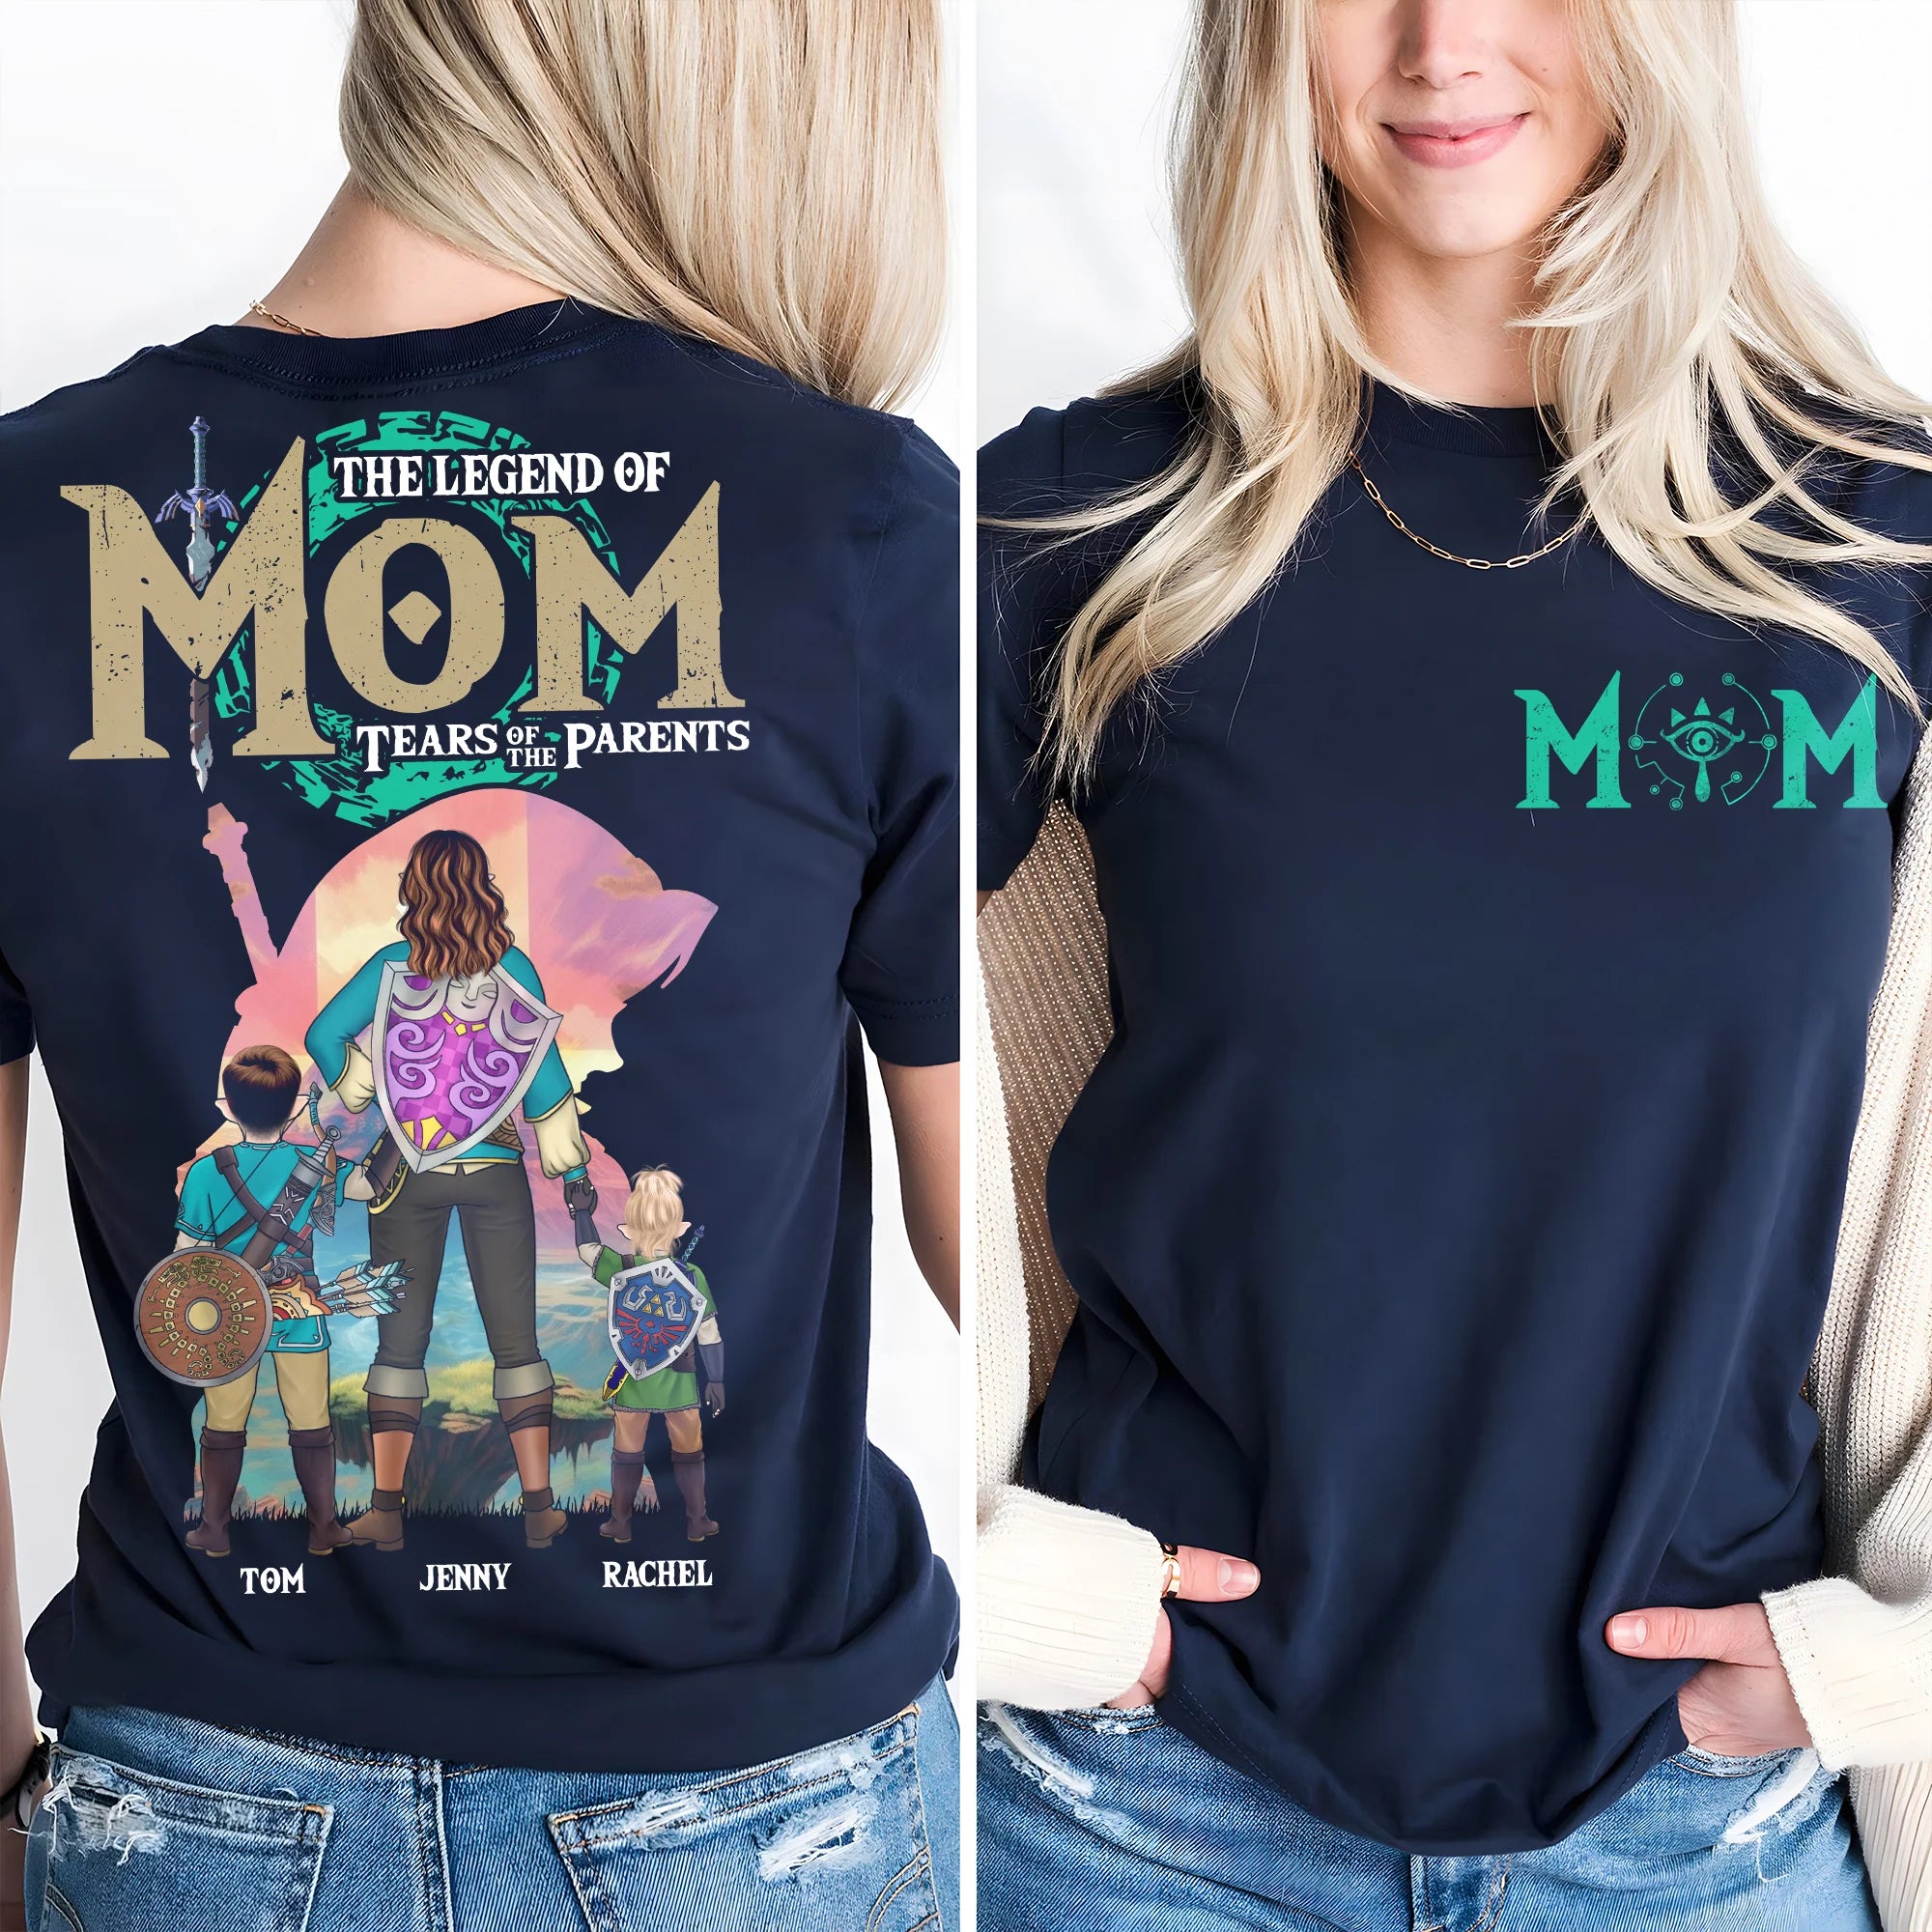 Personalized Gifts For Mom Shirt 05qhtn230424hg Mother's Day-Homacus